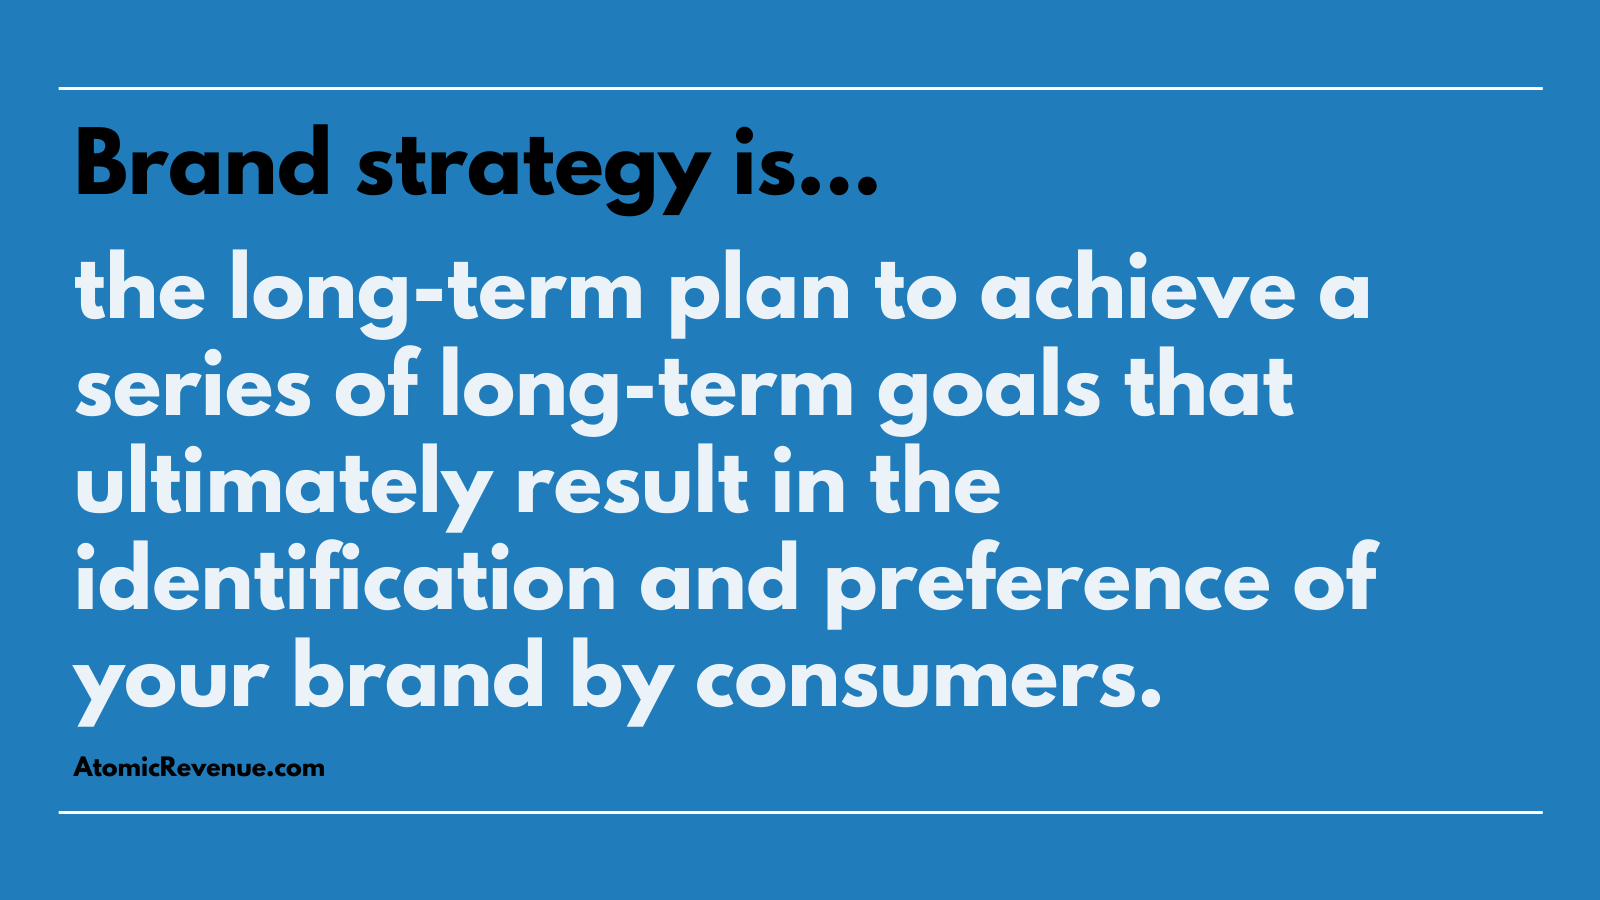 brand strategy is long term plan achieve series long-term goals identification preference your brand by customers atomic revenue